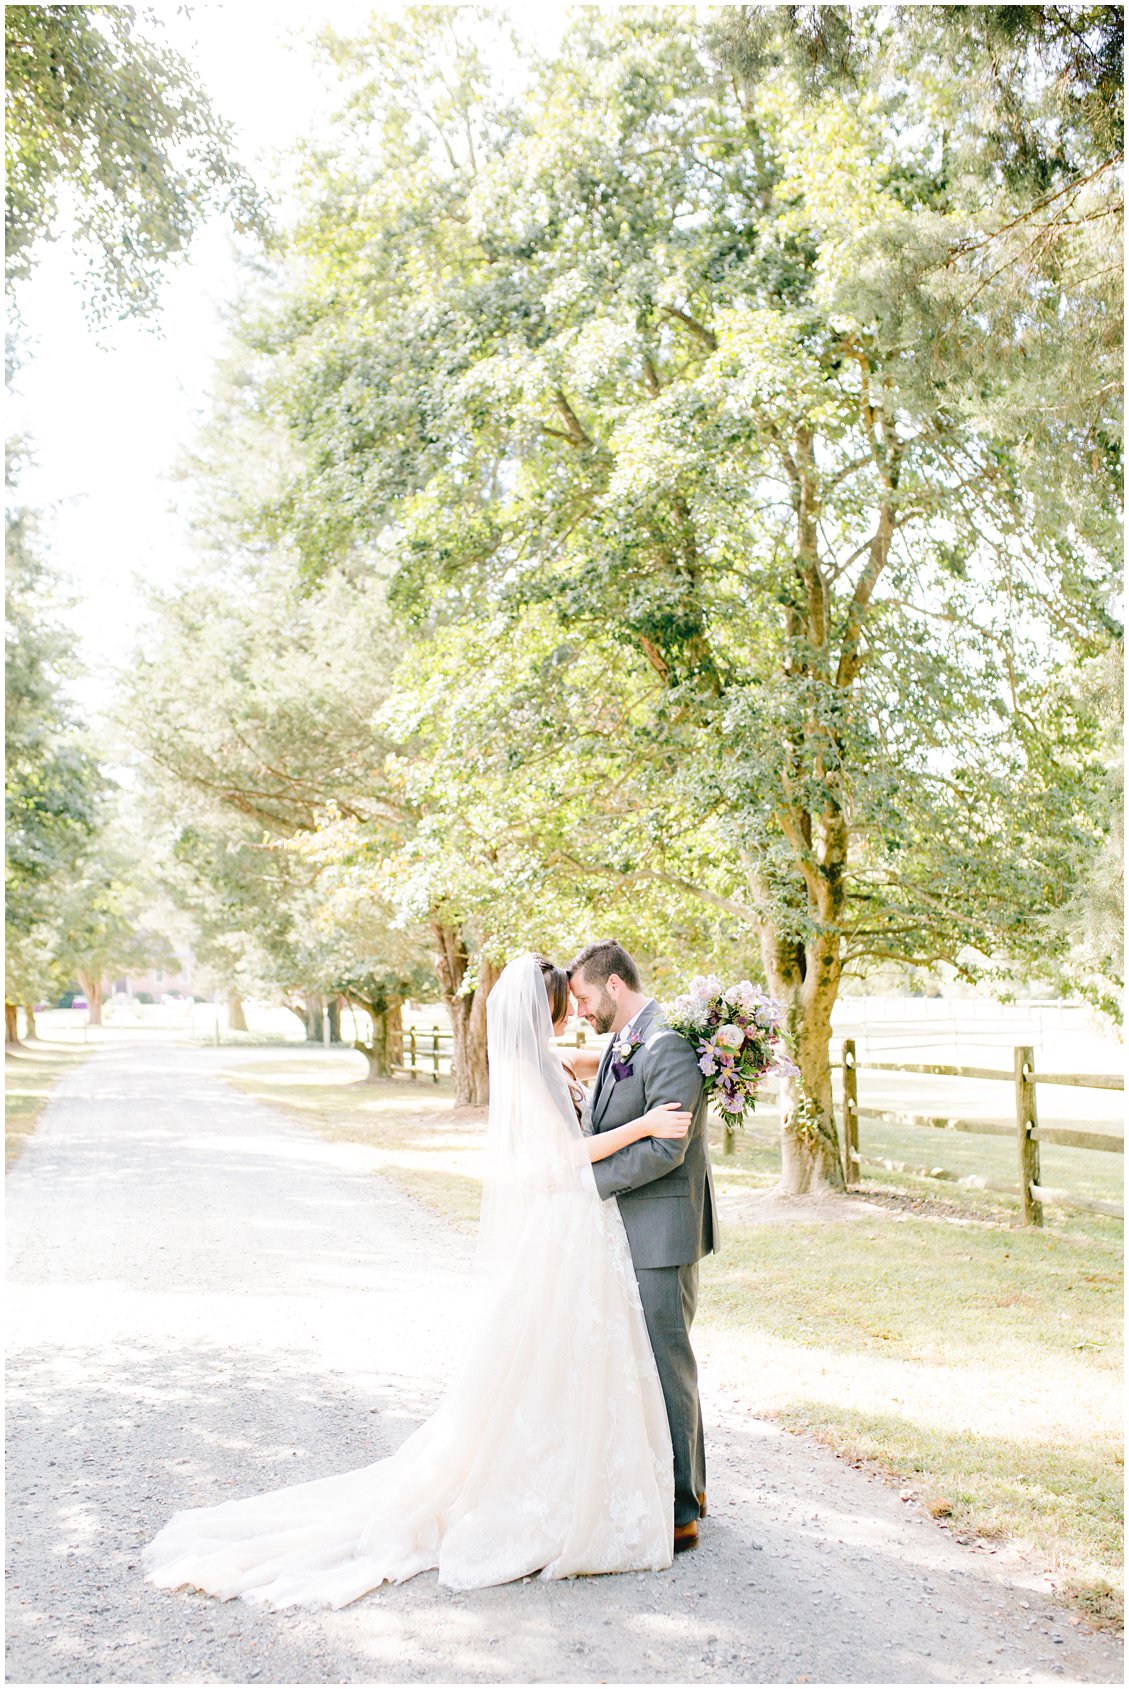 Intimate outdoor wedding in Richmond Virginia captured by Tara & Stephen of Pattengale Photography